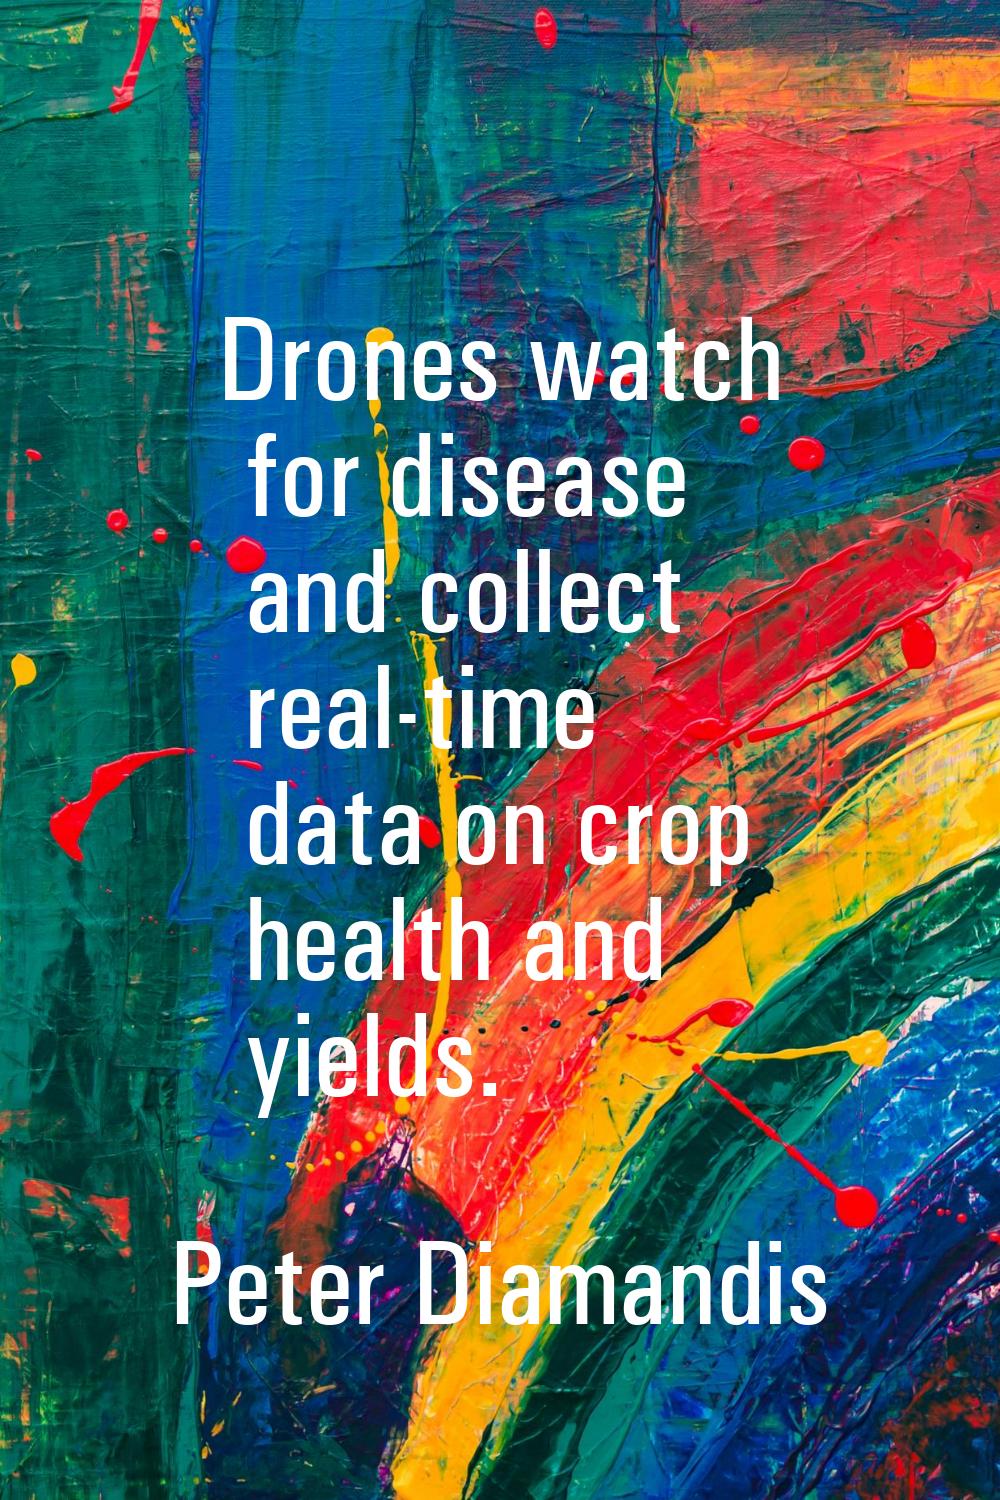 Drones watch for disease and collect real-time data on crop health and yields.